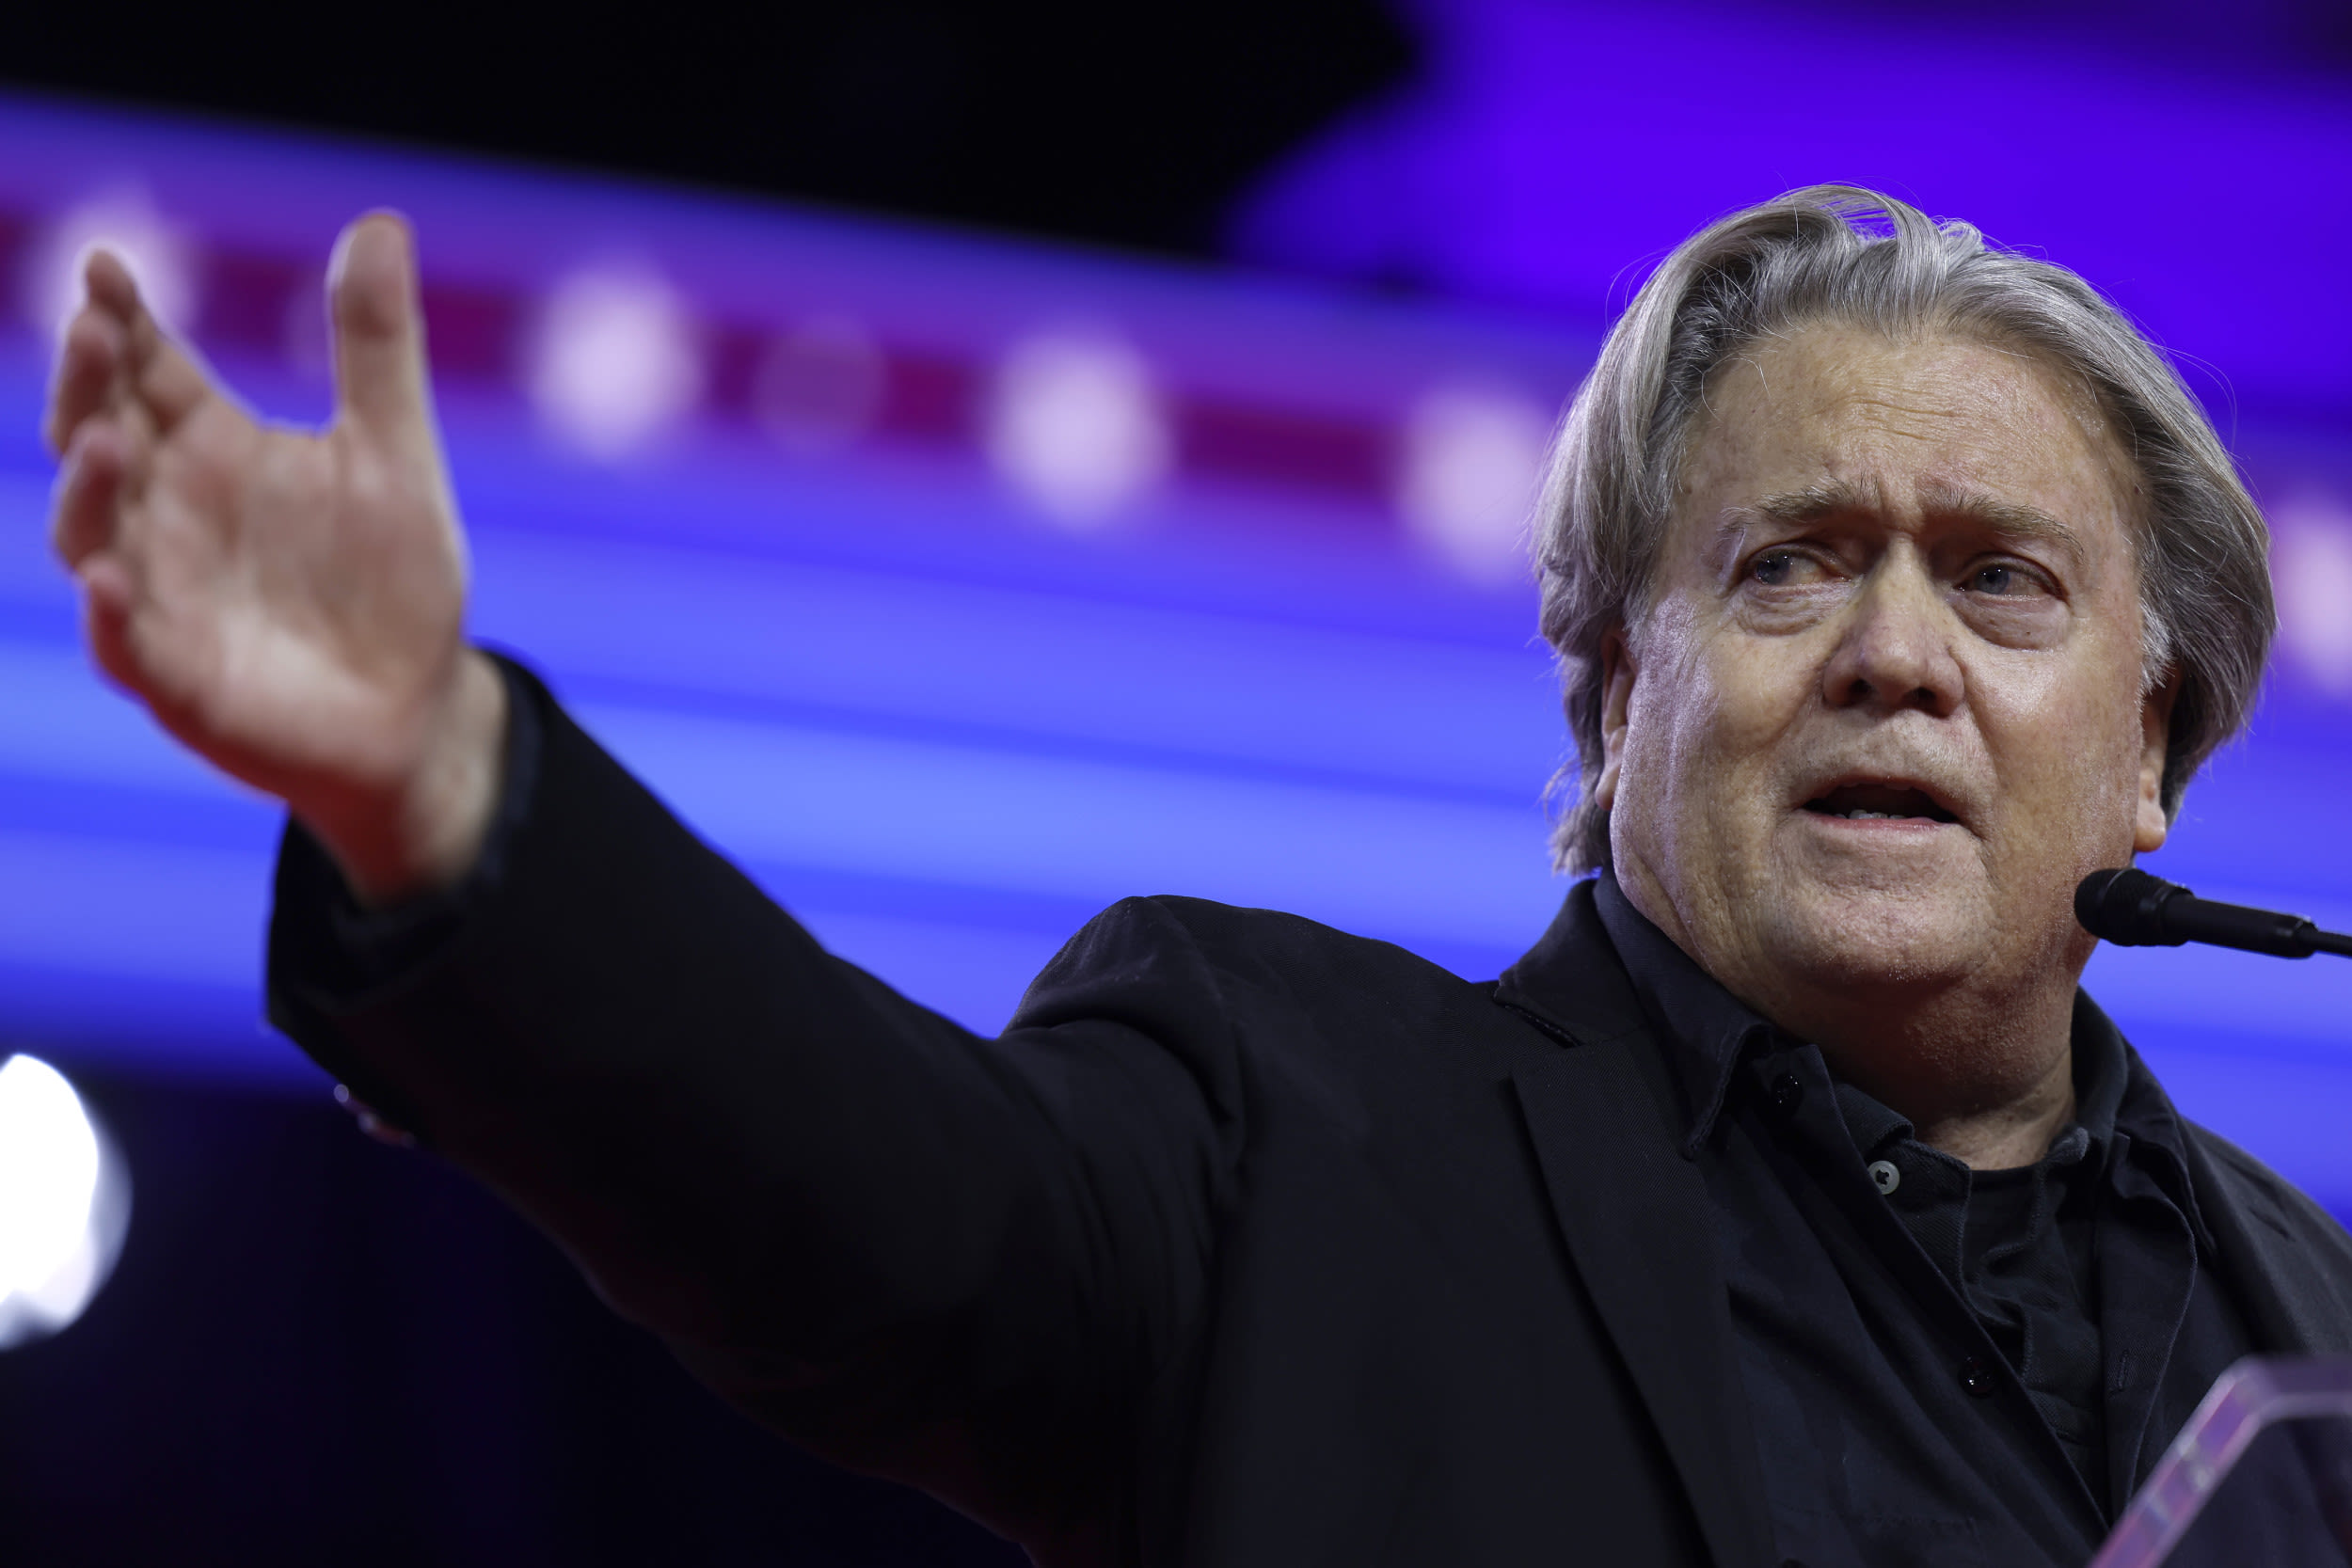 Steve Bannon wants Donald Trump Jr. to be next attorney general